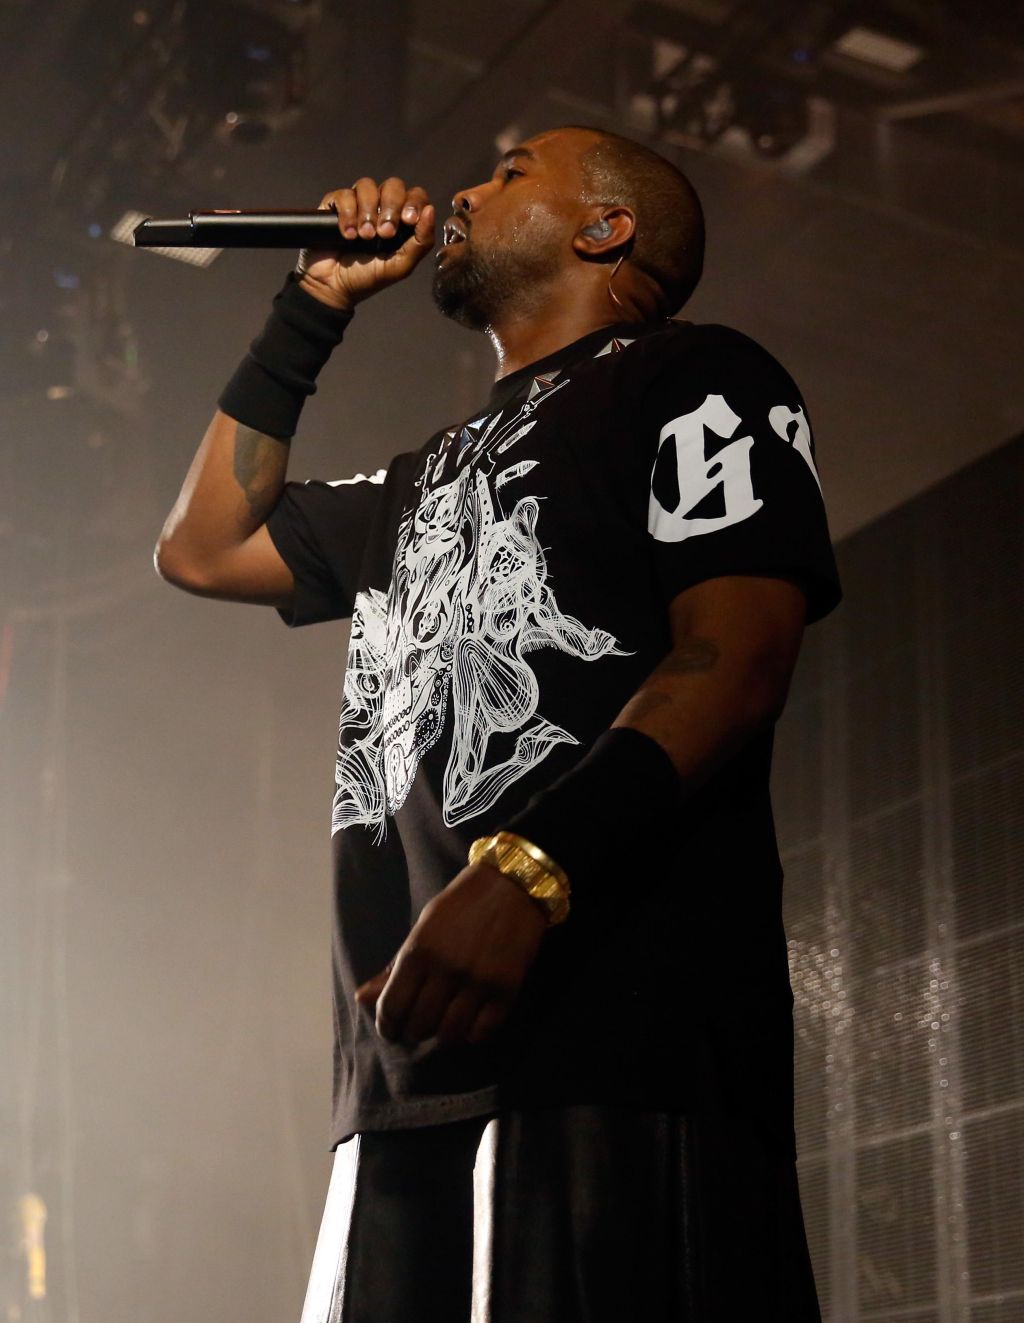 Samsung Galaxy Presents JAY Z and Kanye West At SXSW